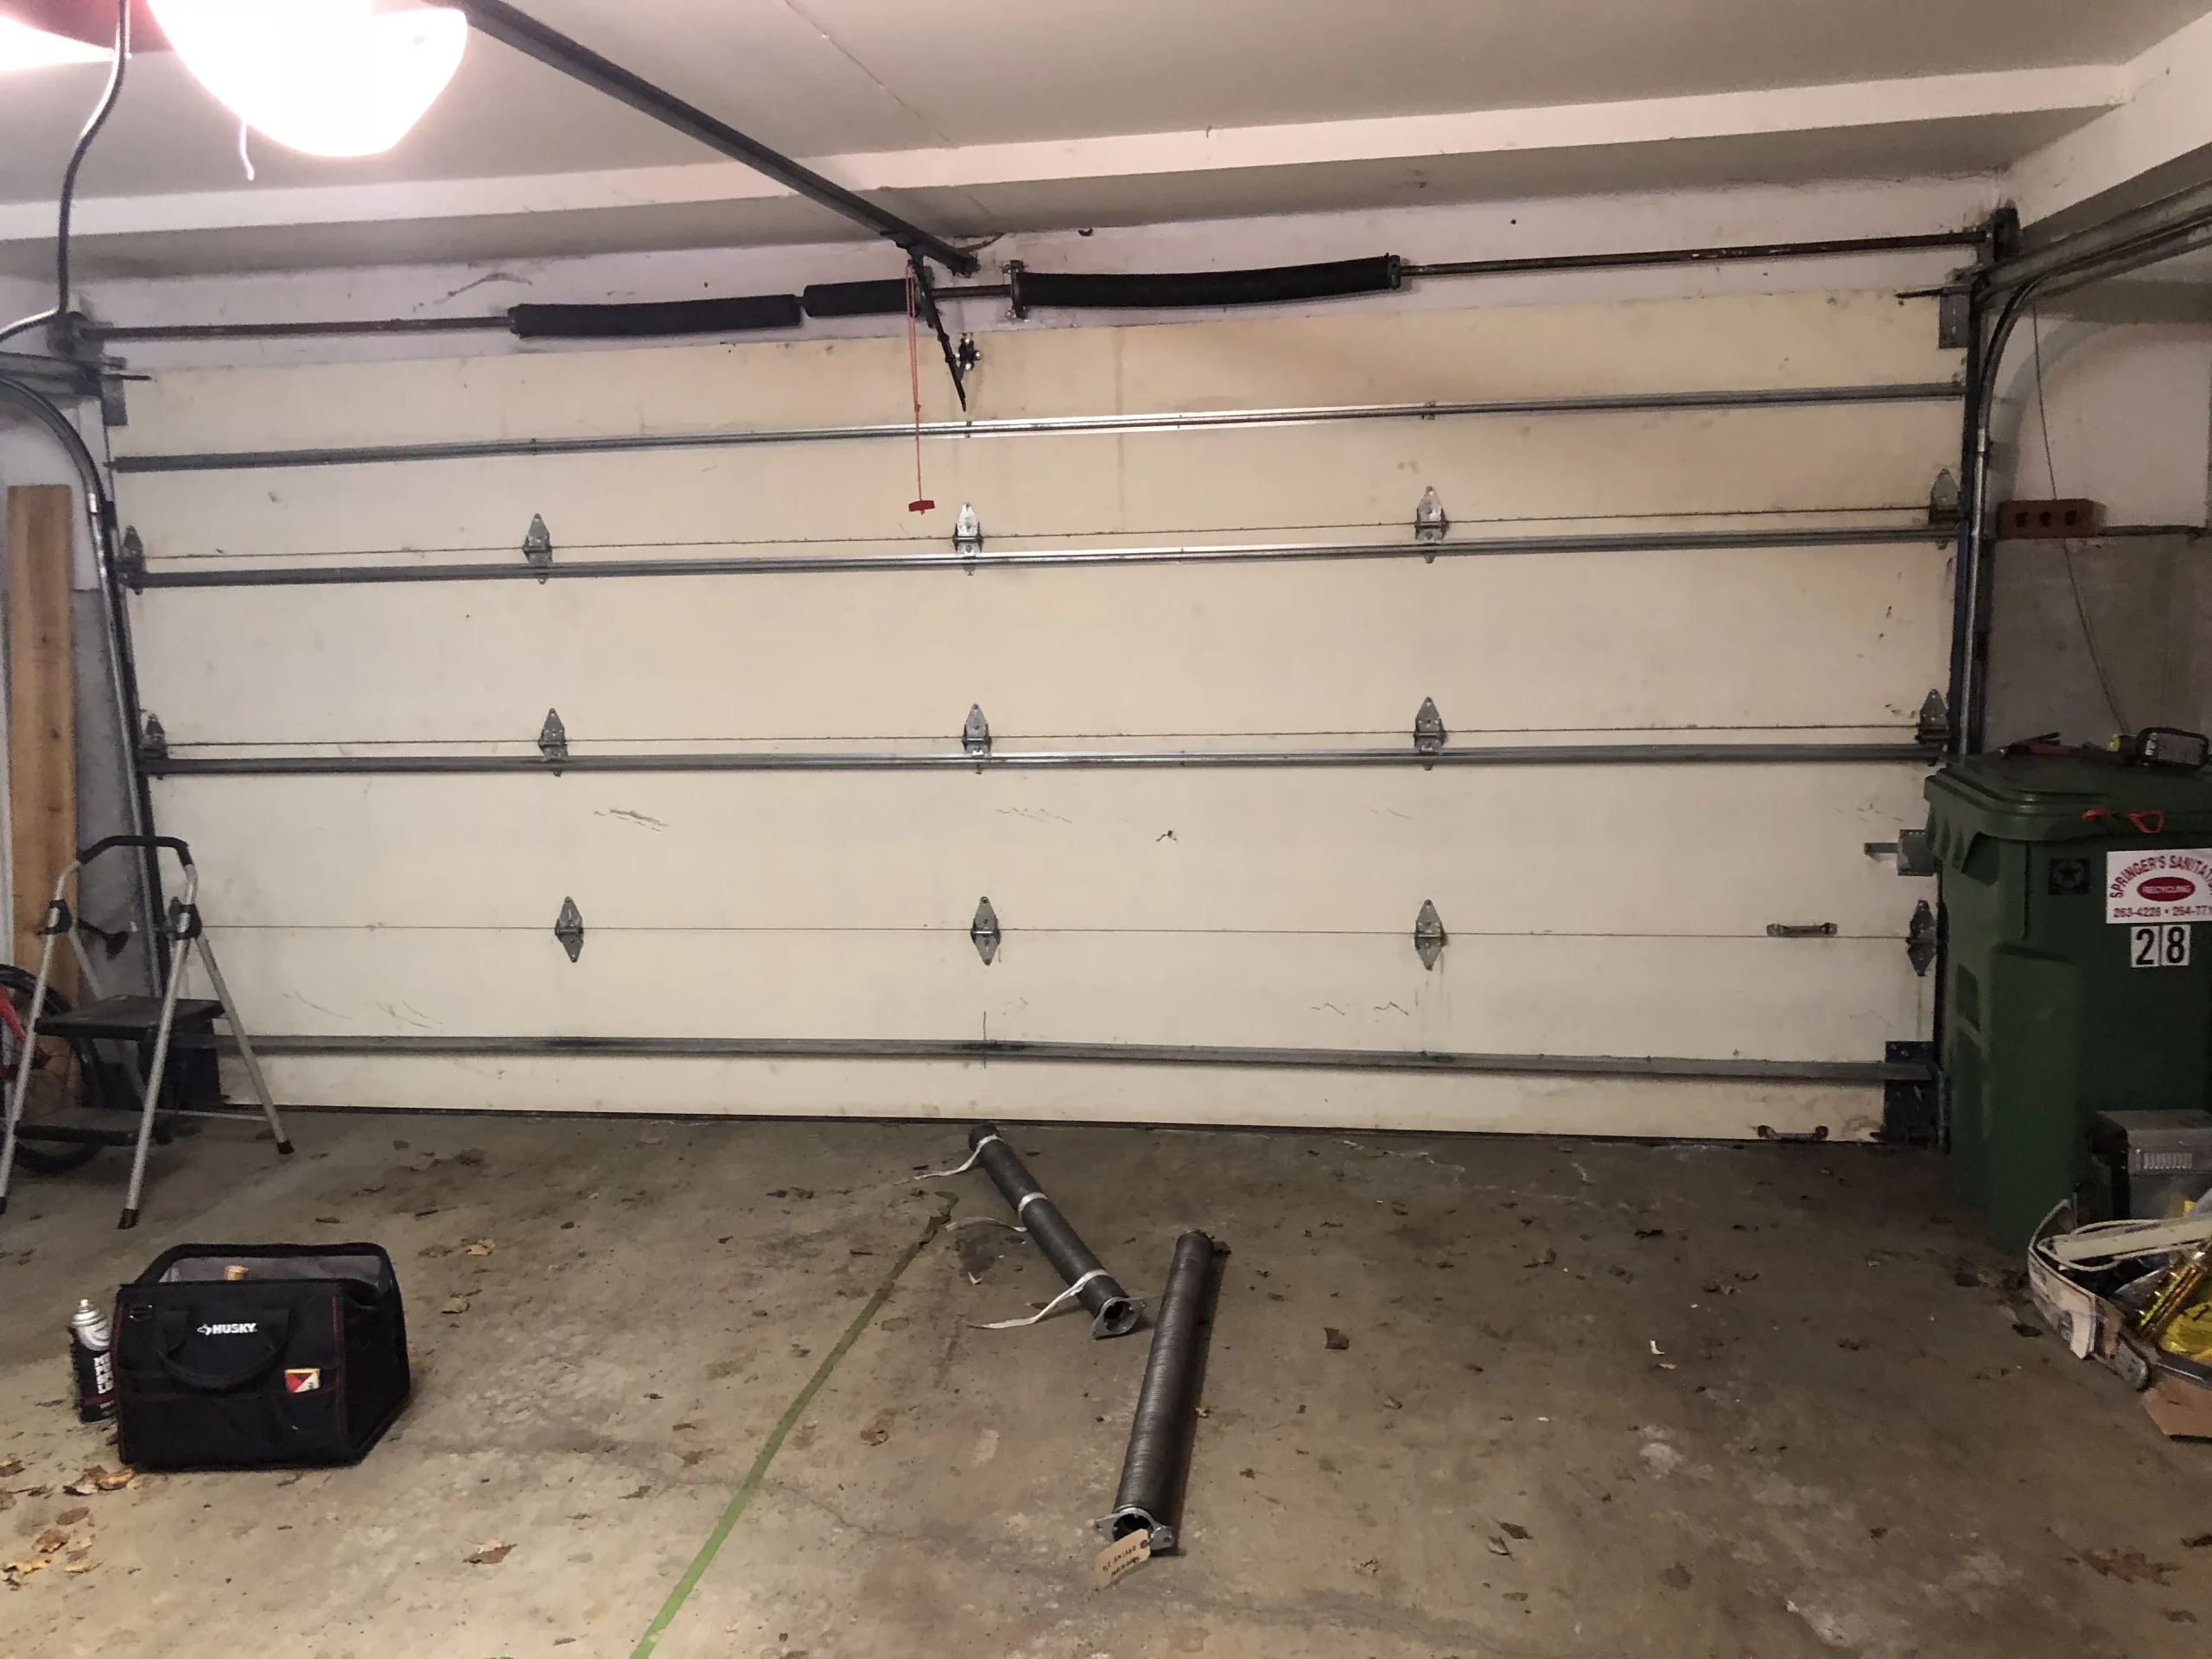 How to Fix a Garage Door: Common Problems and DIY Repairs